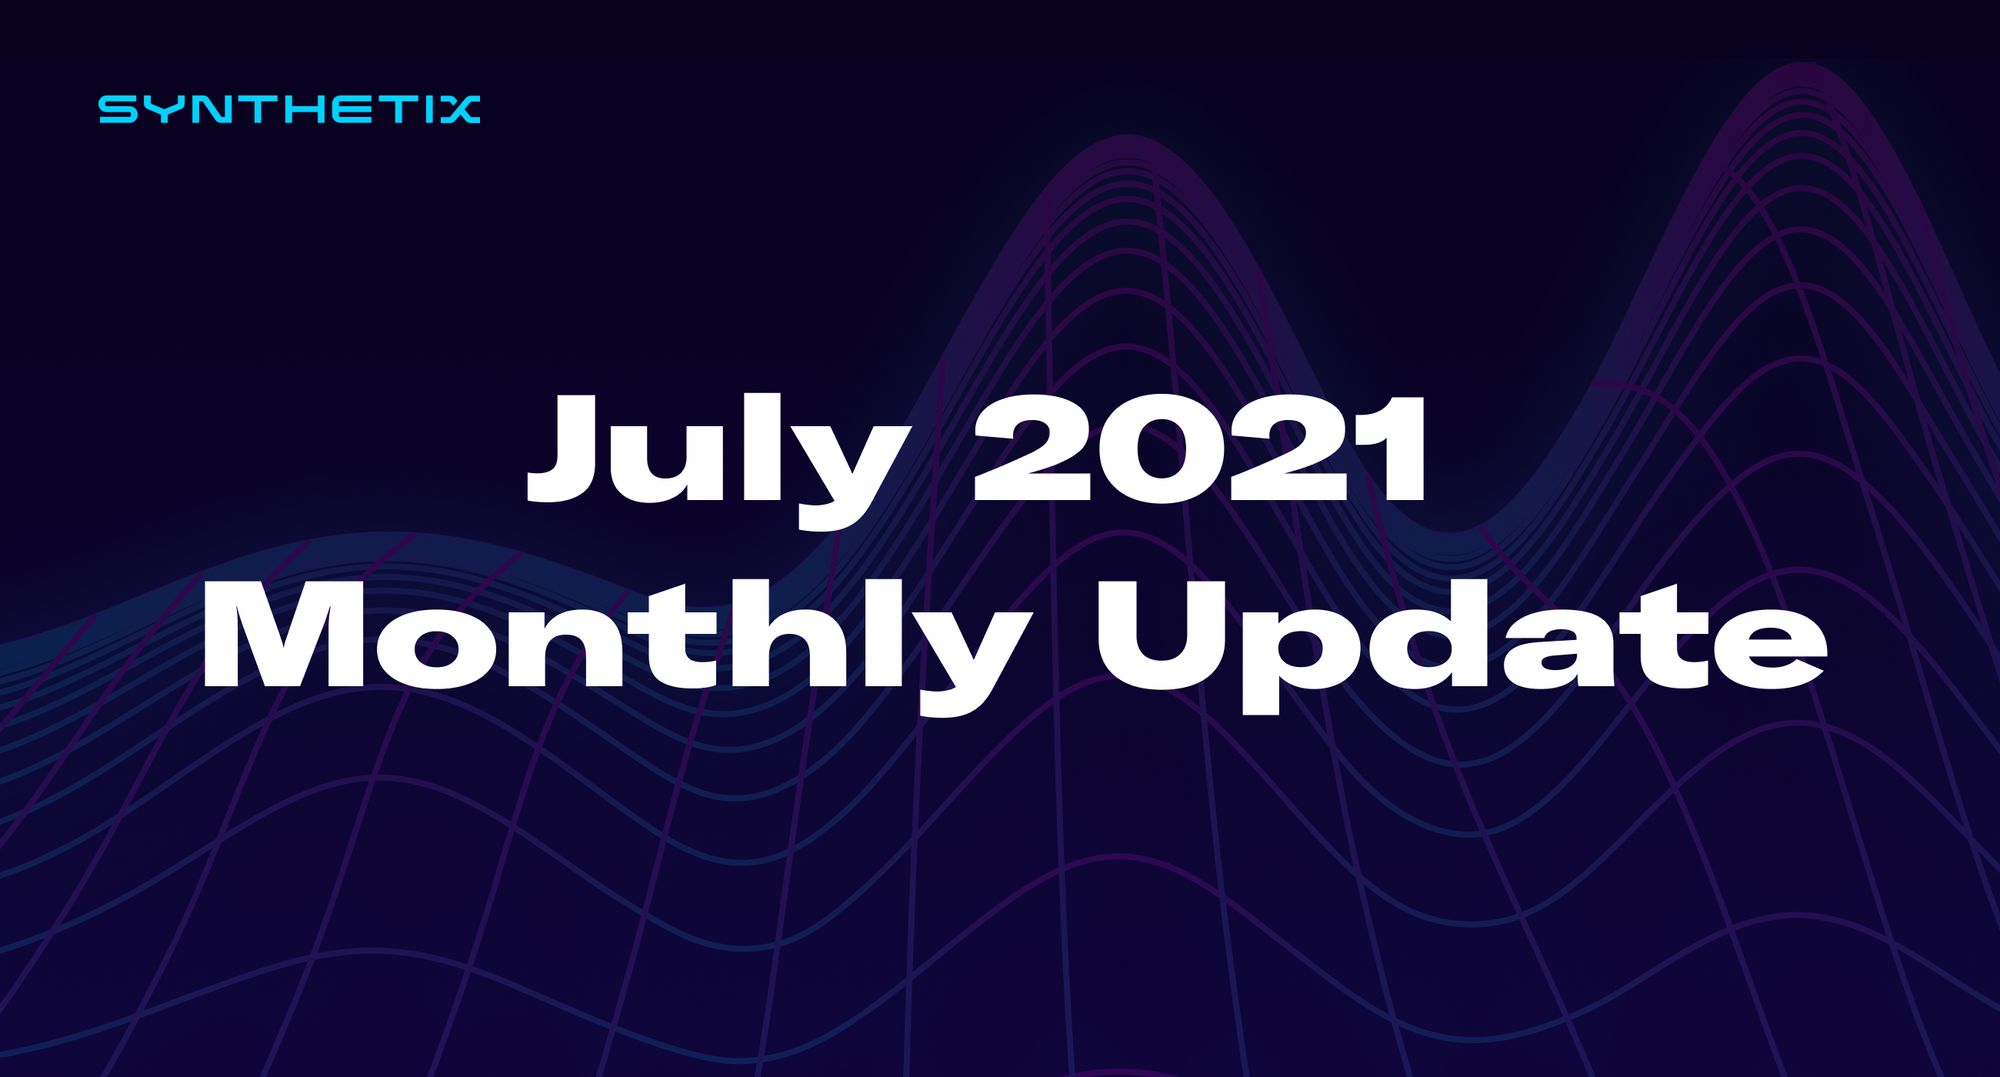 July 2021 Monthly Update